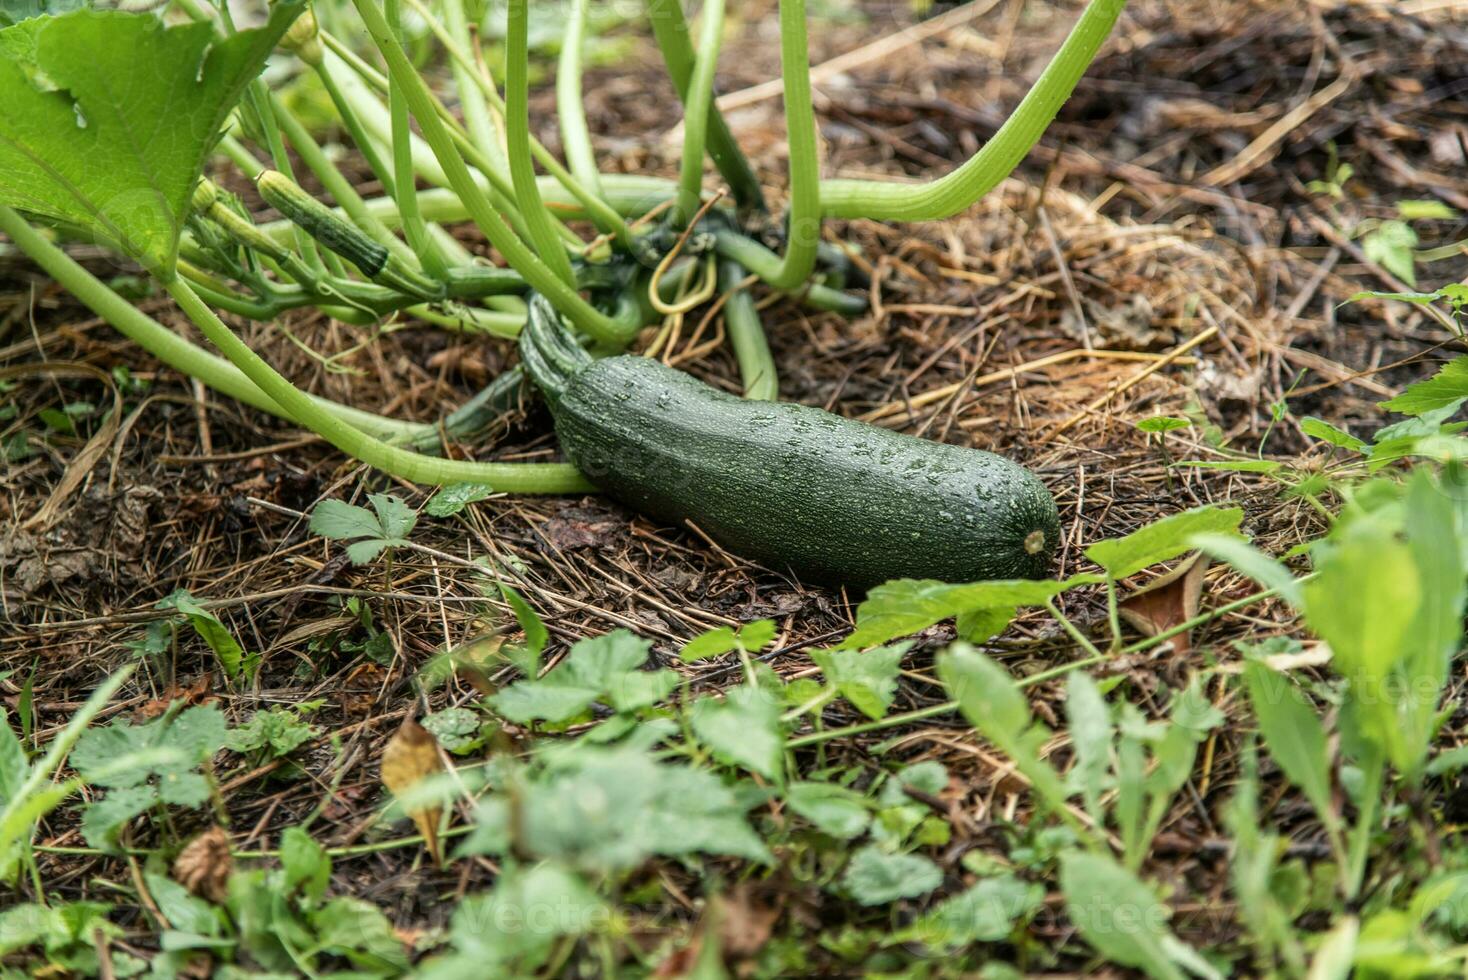 Green zucchini grows on a garden bed. photo